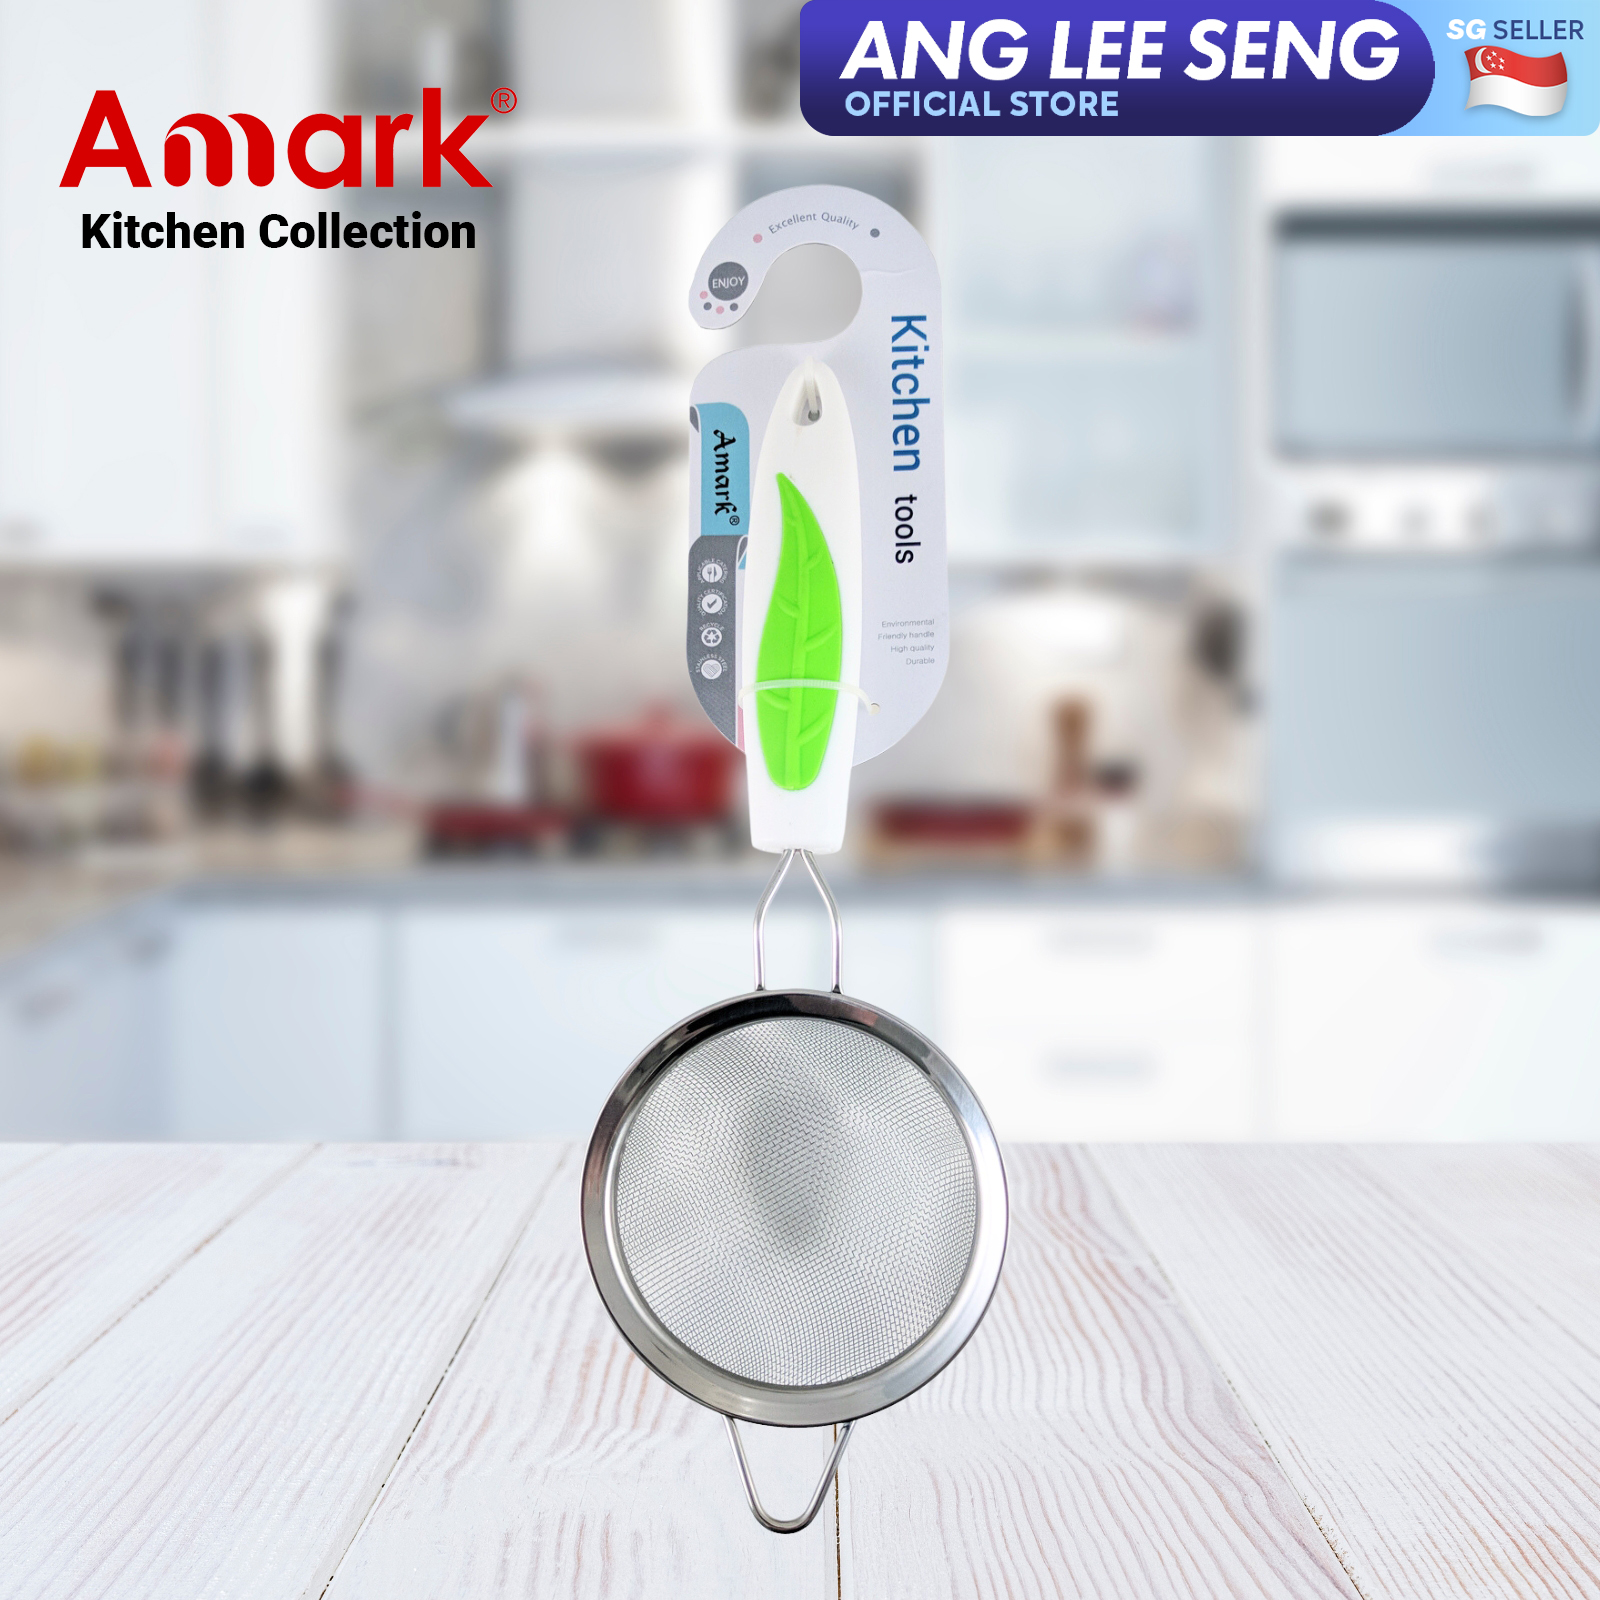 Amark Kitchen Collection Green Leaf Stainless Steel Tea Strainer - Strain Tea, Coffee, Juice, Soups & Sifting Flour